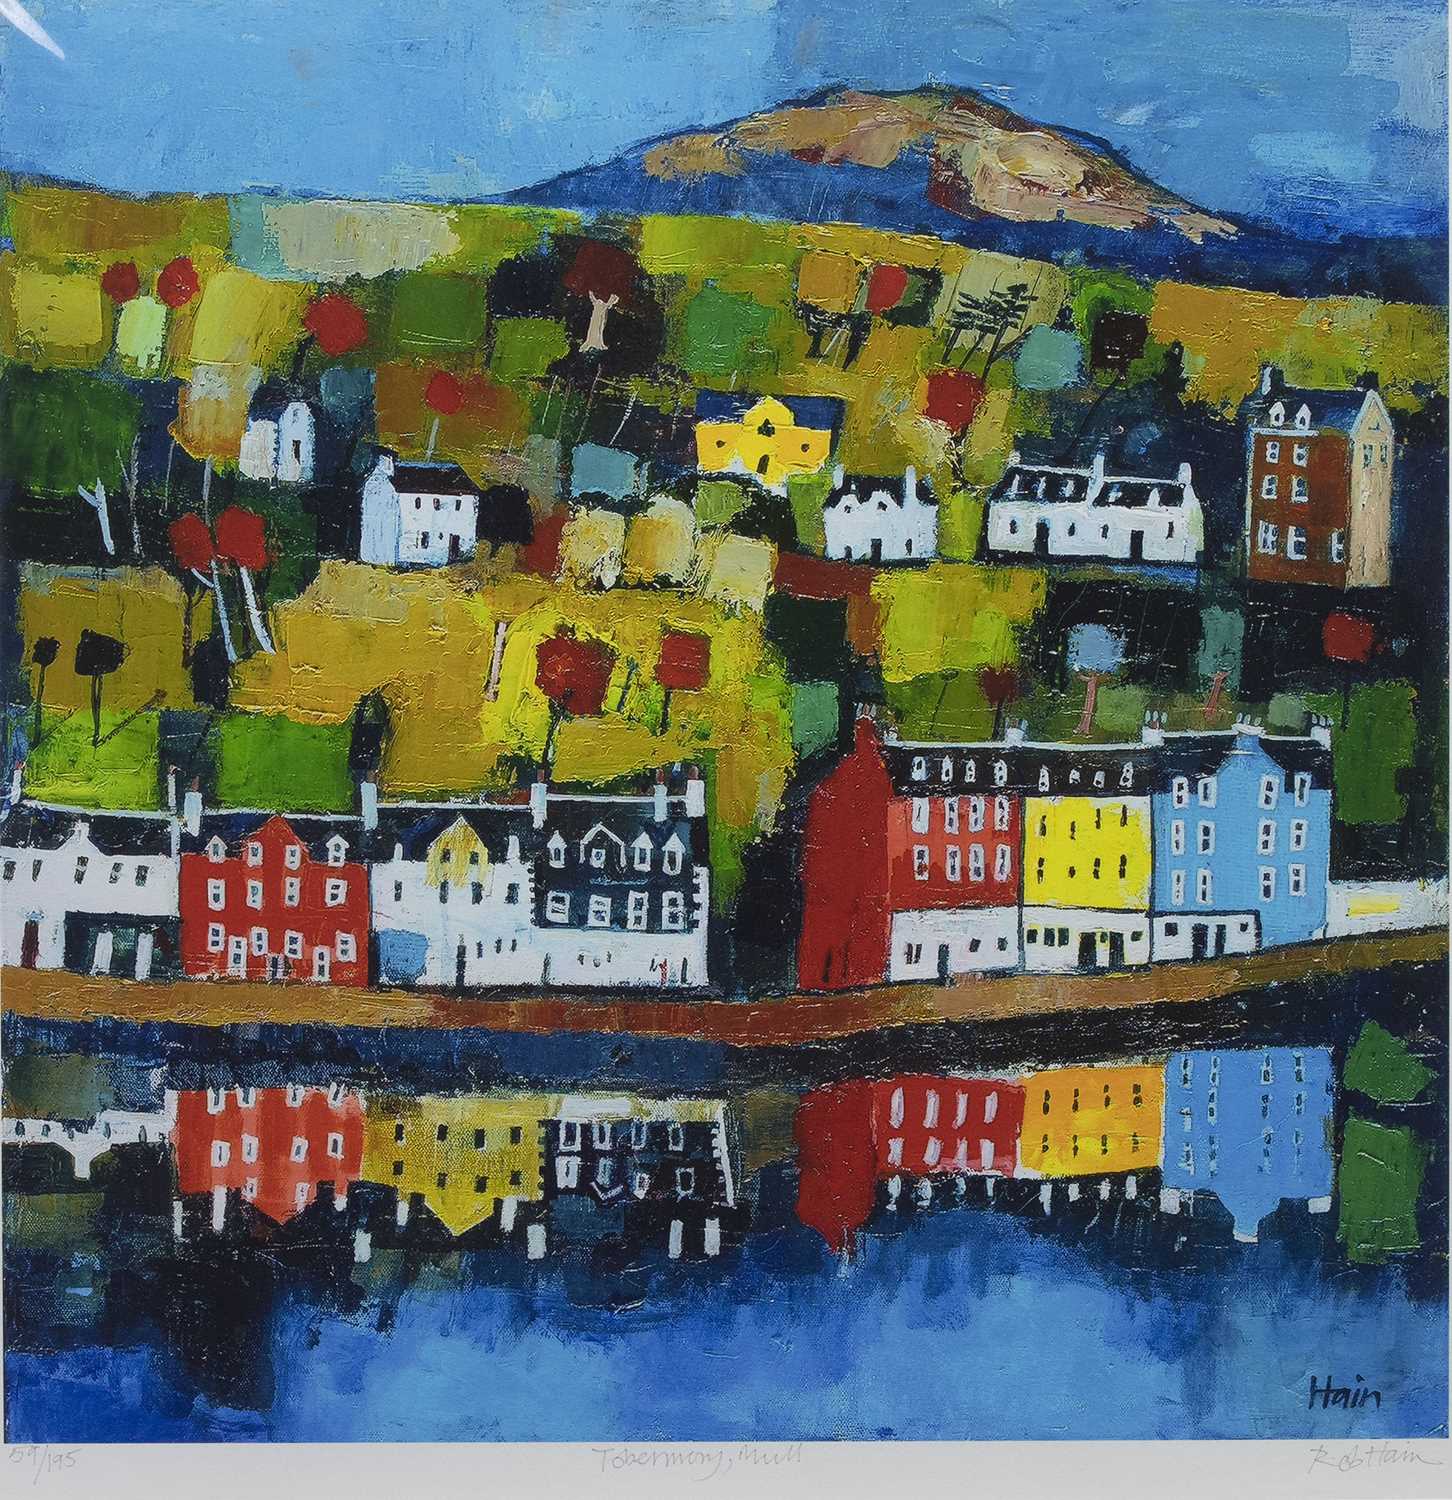 Lot 480 - TOBERMORY, MULL, A PRINT BY ROB HAIN